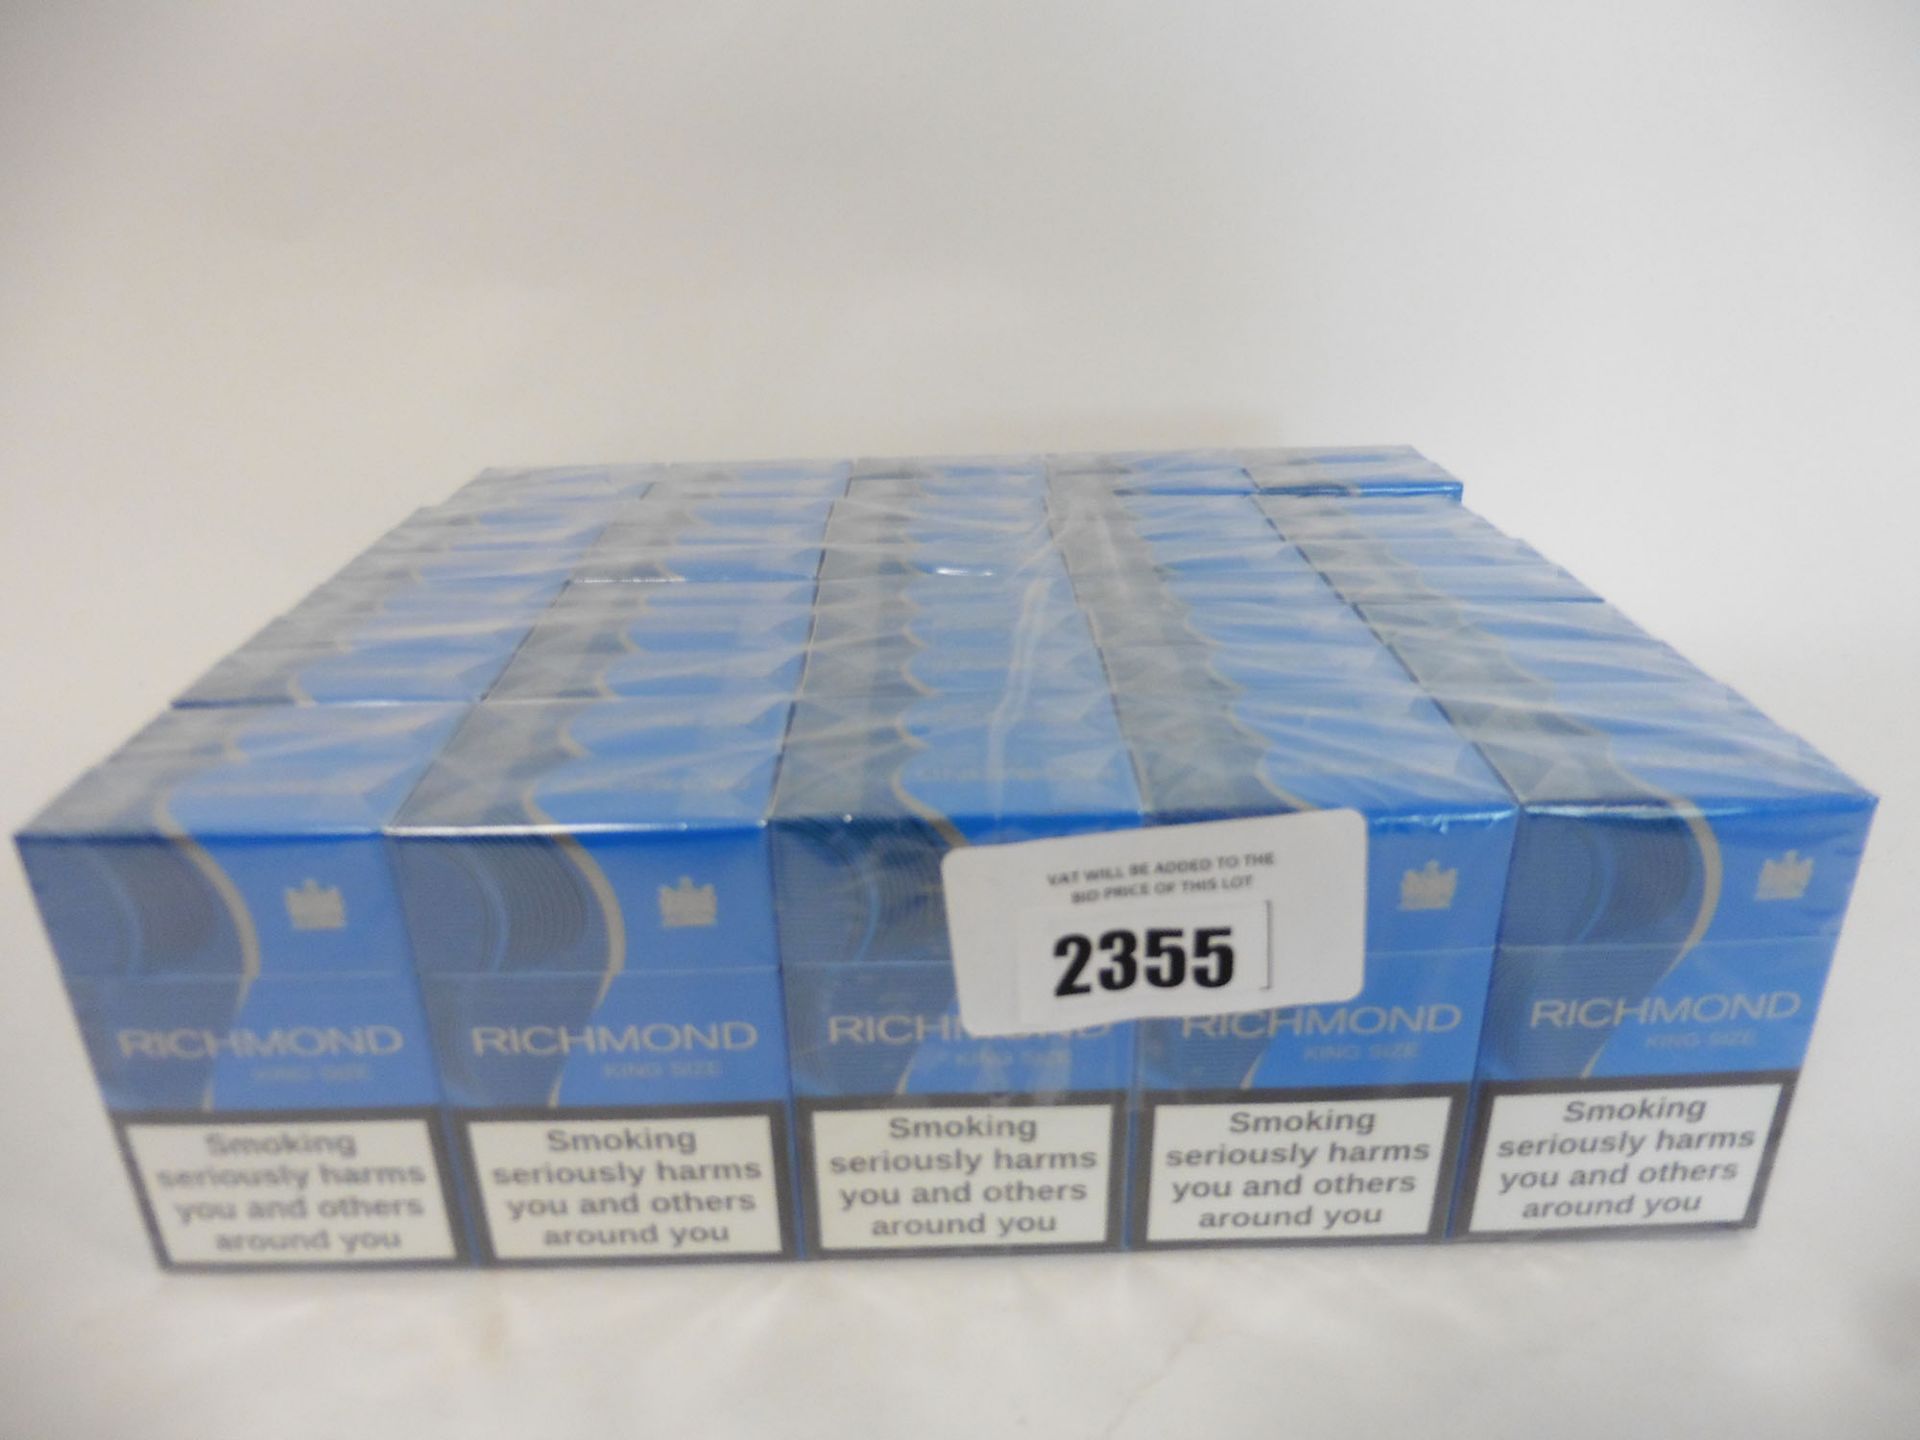 50 packs of 20 Richmond KingSize cigarettes by Imperial Tobacco Sealed packaging